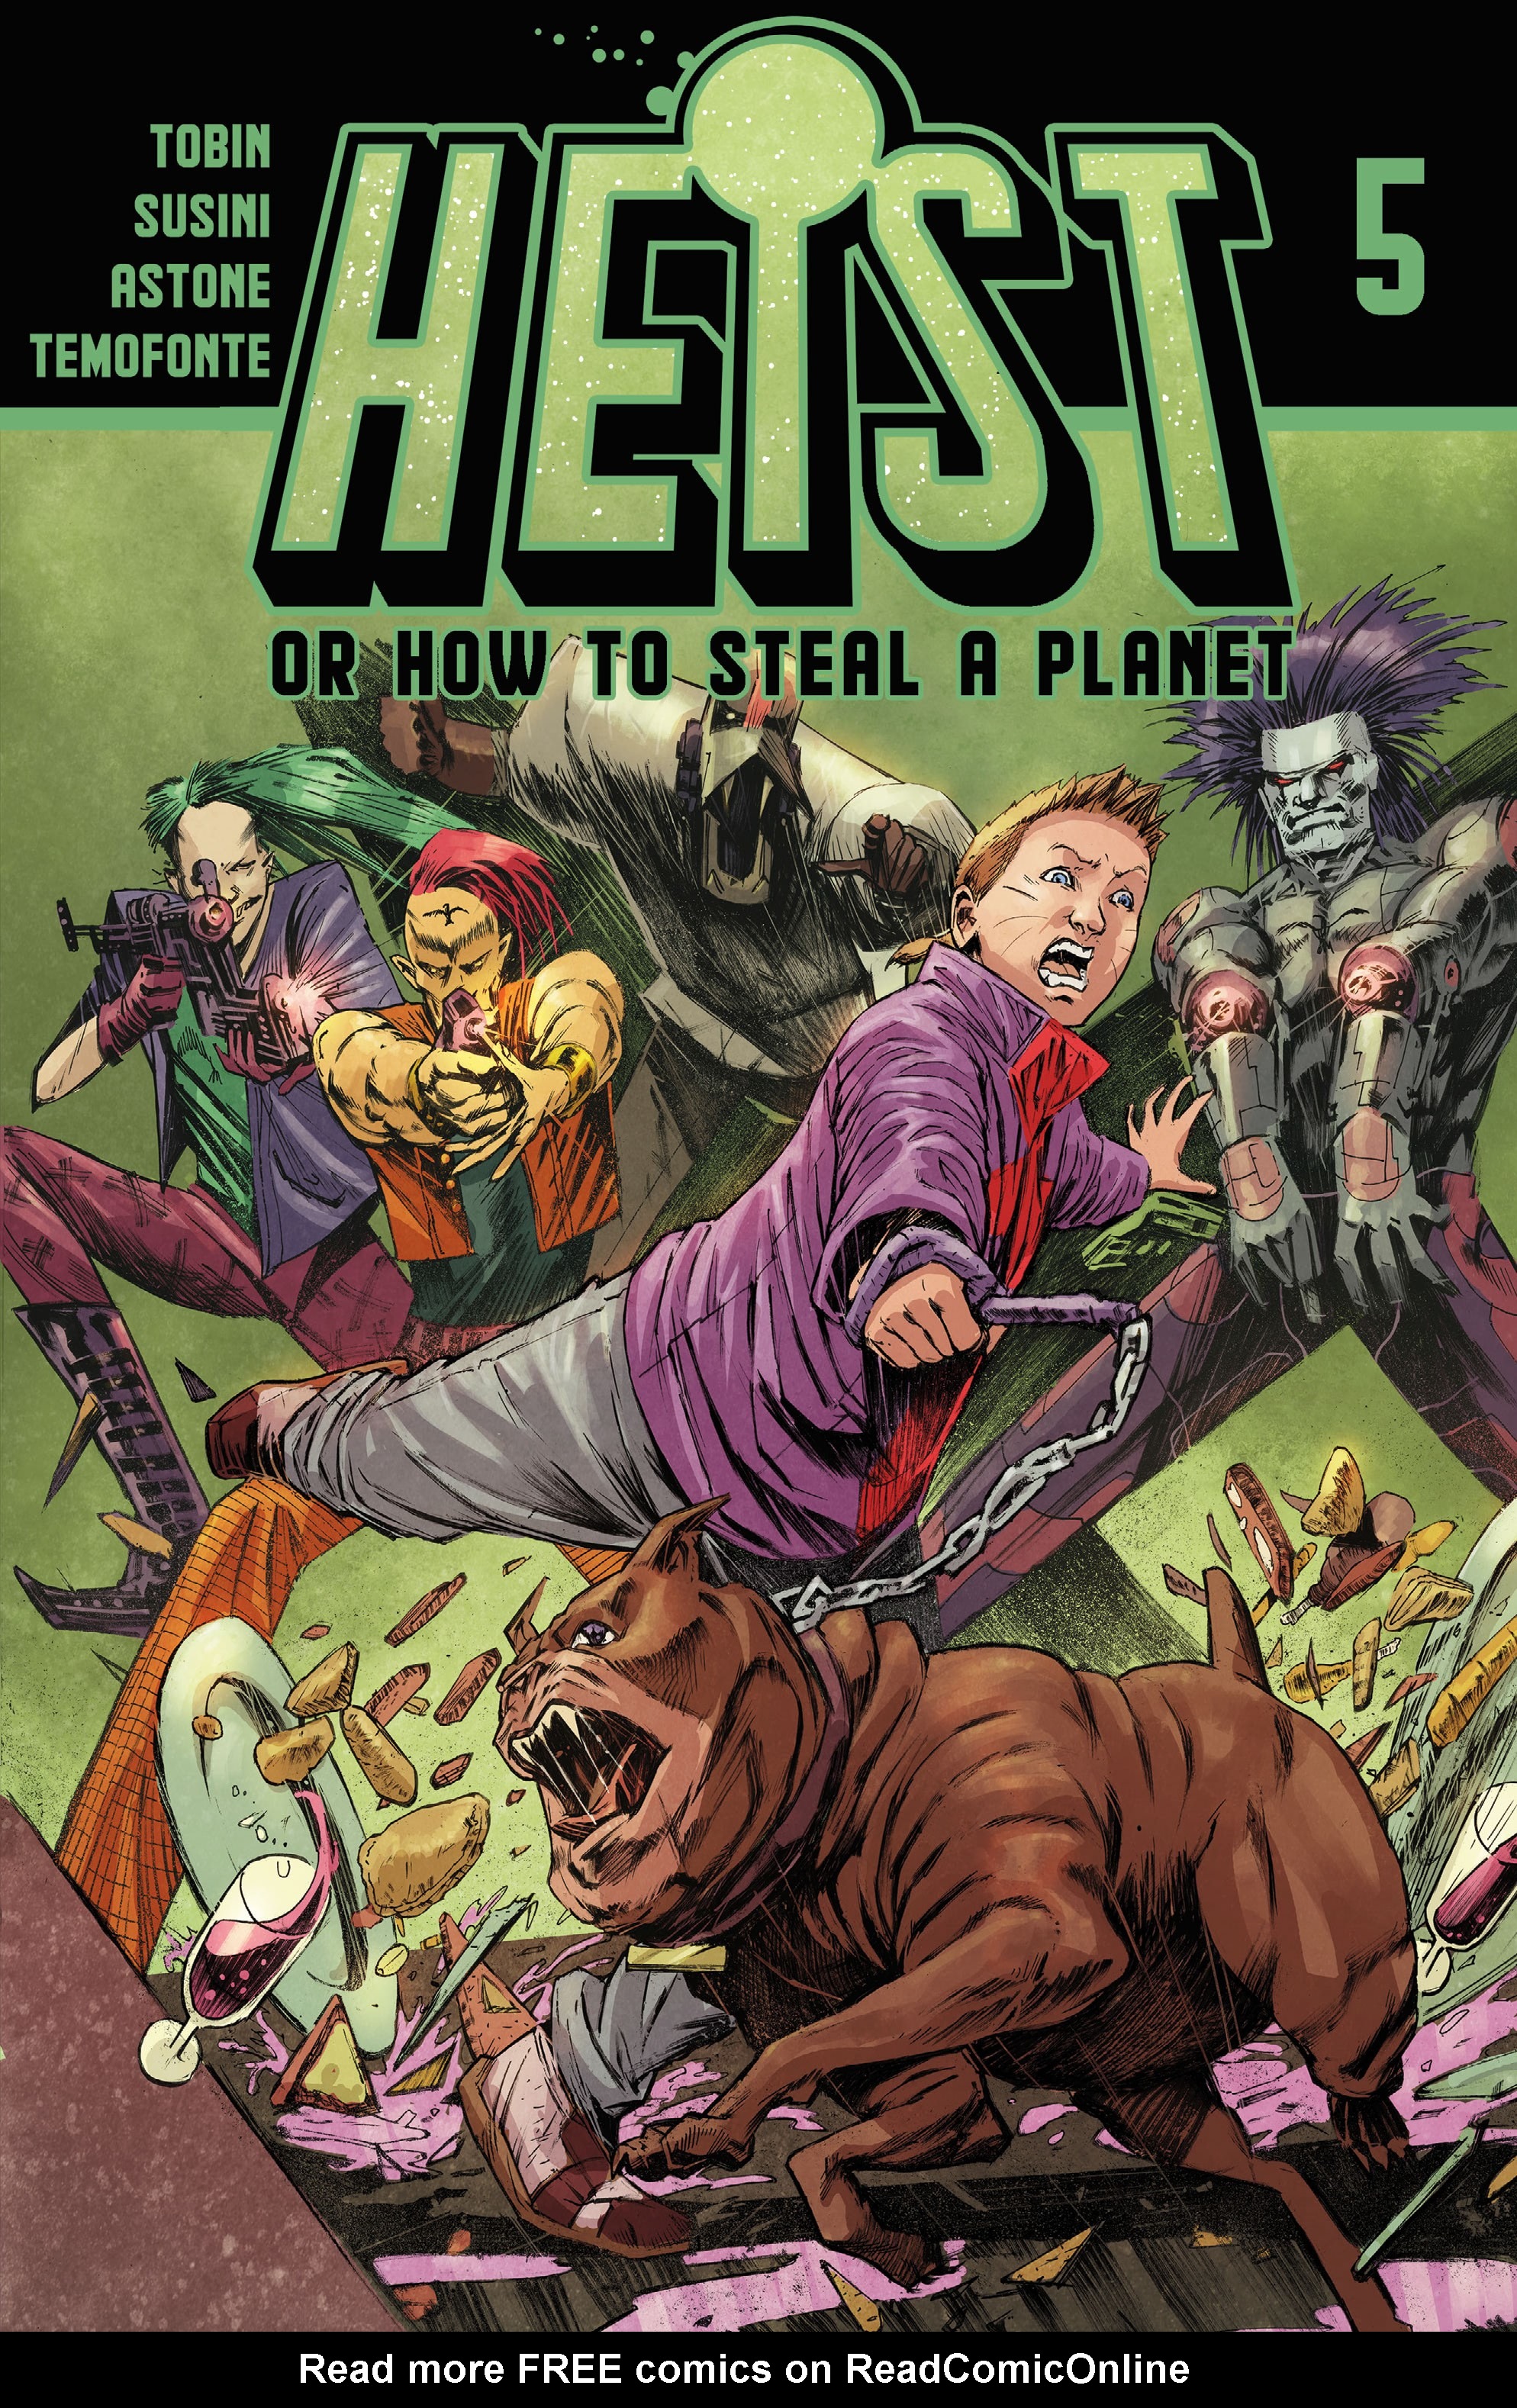 Read online Heist, Or How to Steal A Planet comic -  Issue #5 - 1